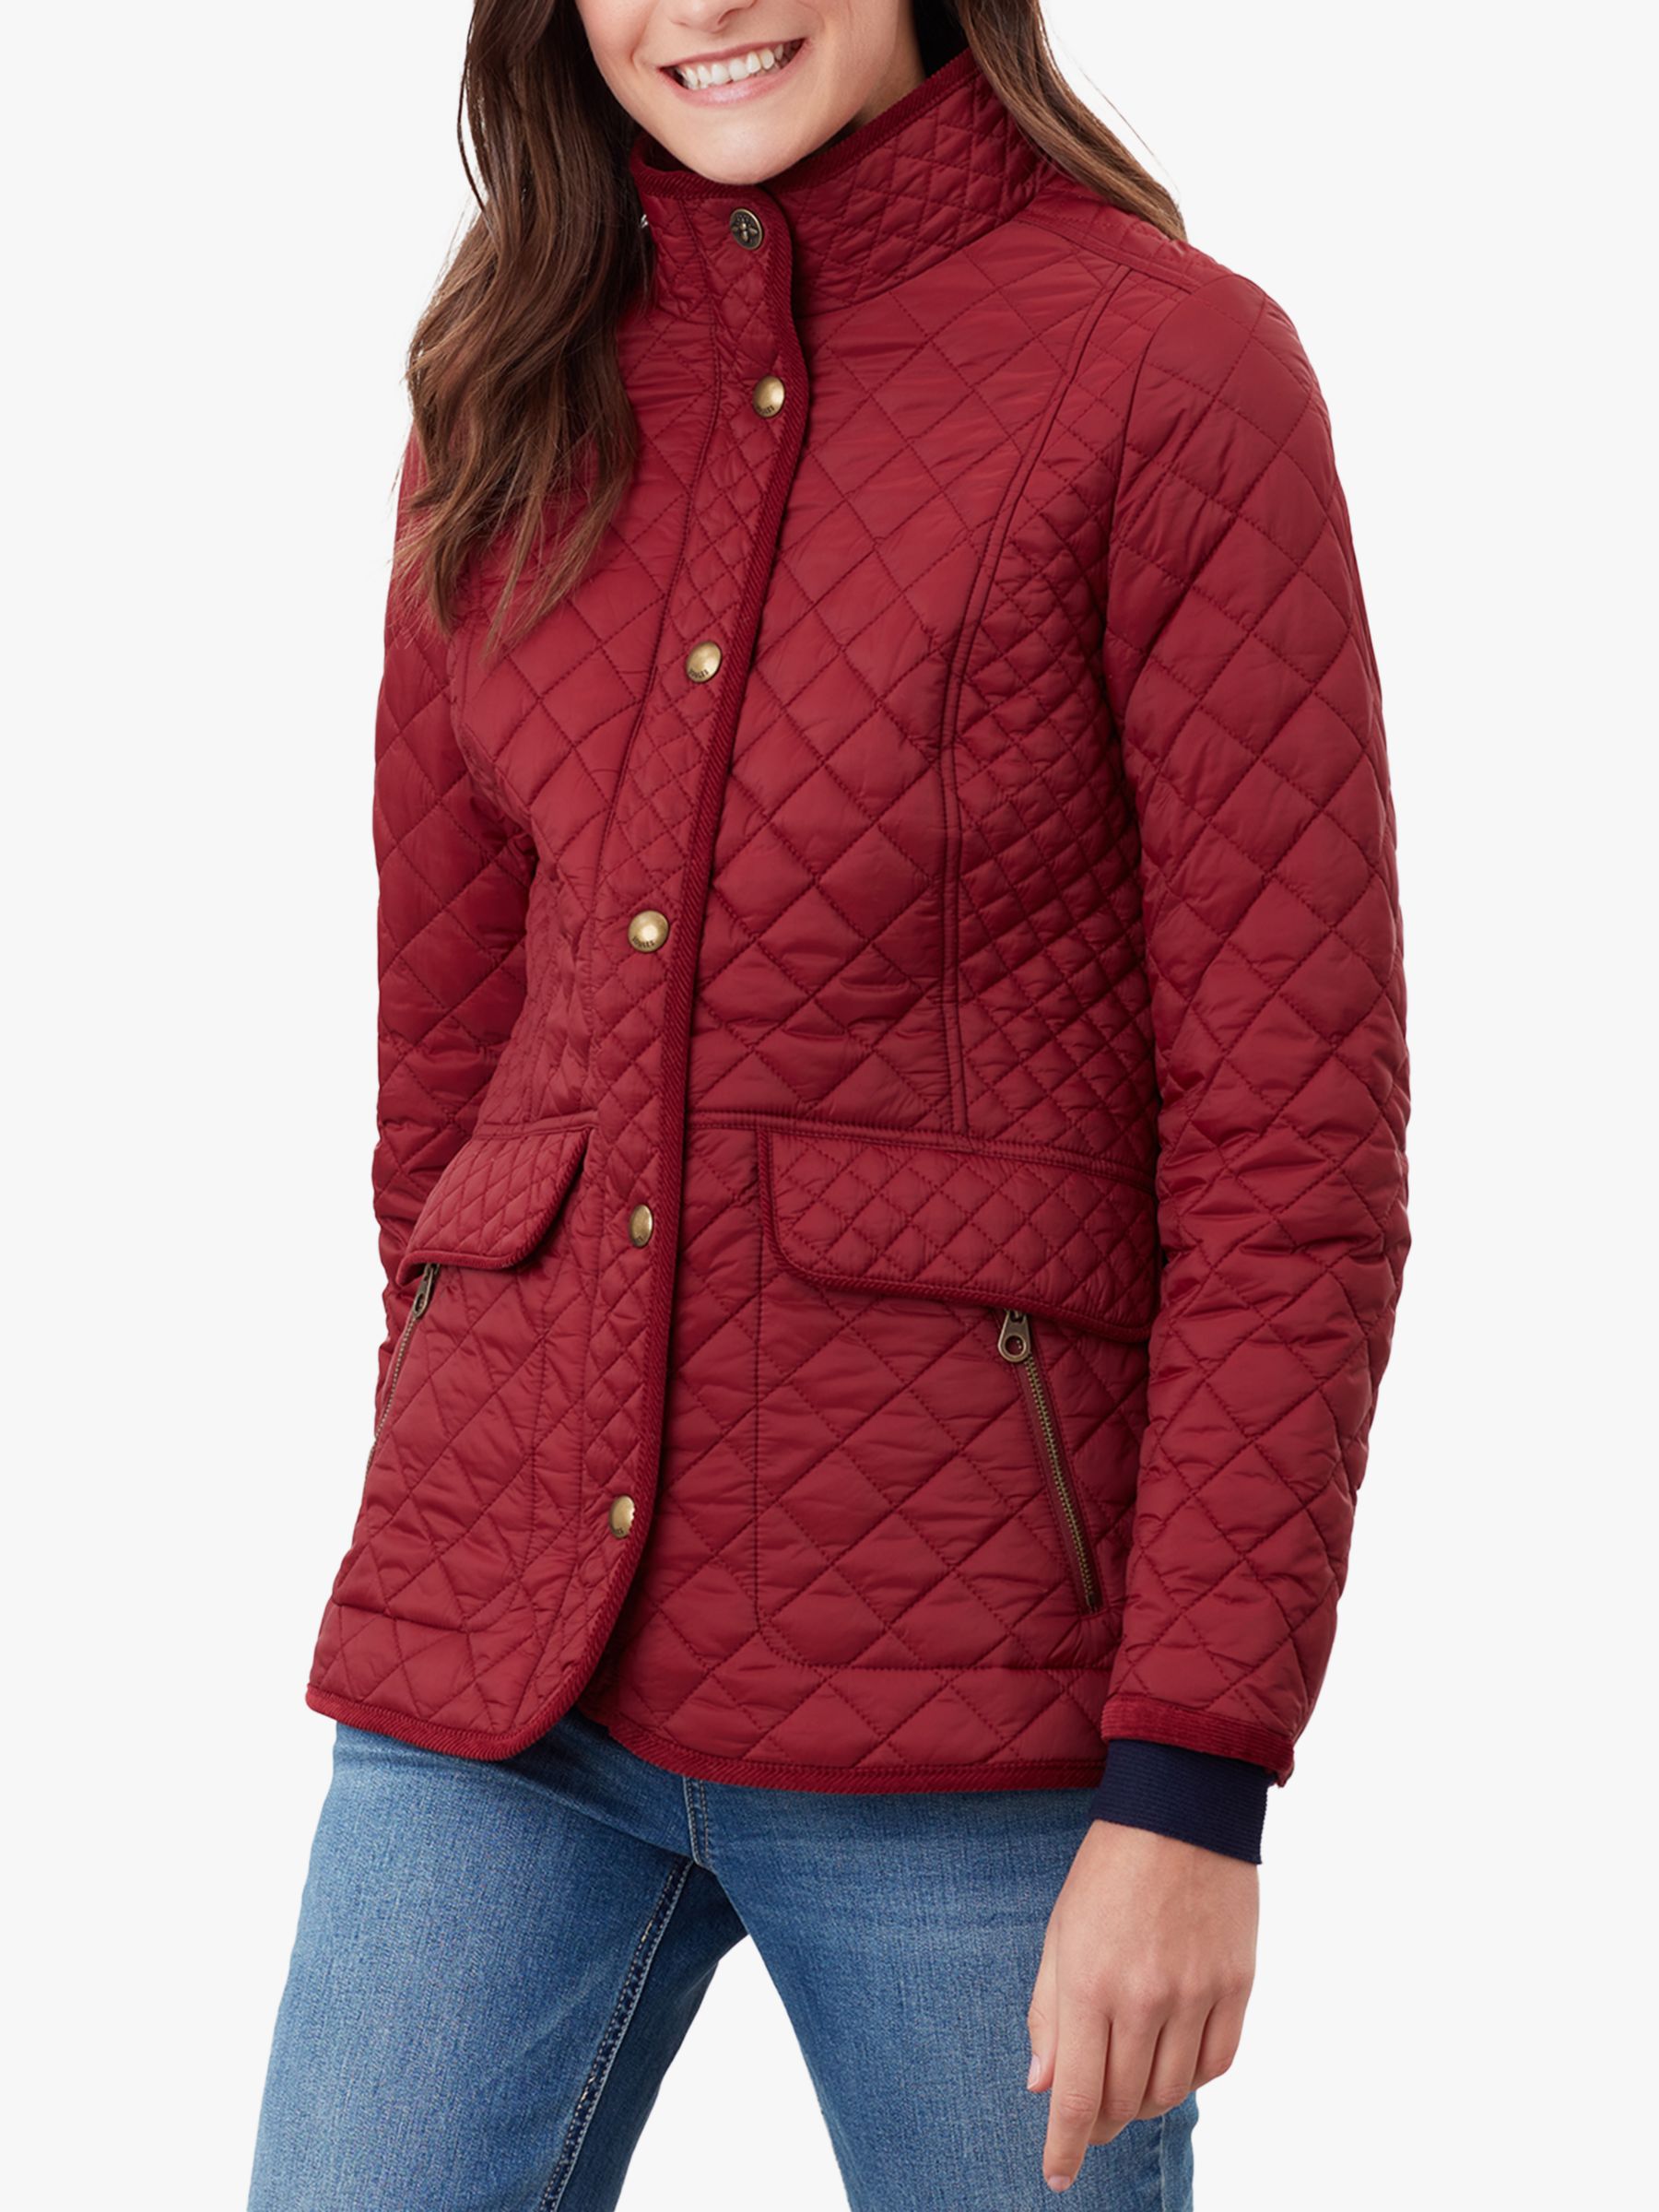 Joules Newdale Quilted Jacket, Burgundy